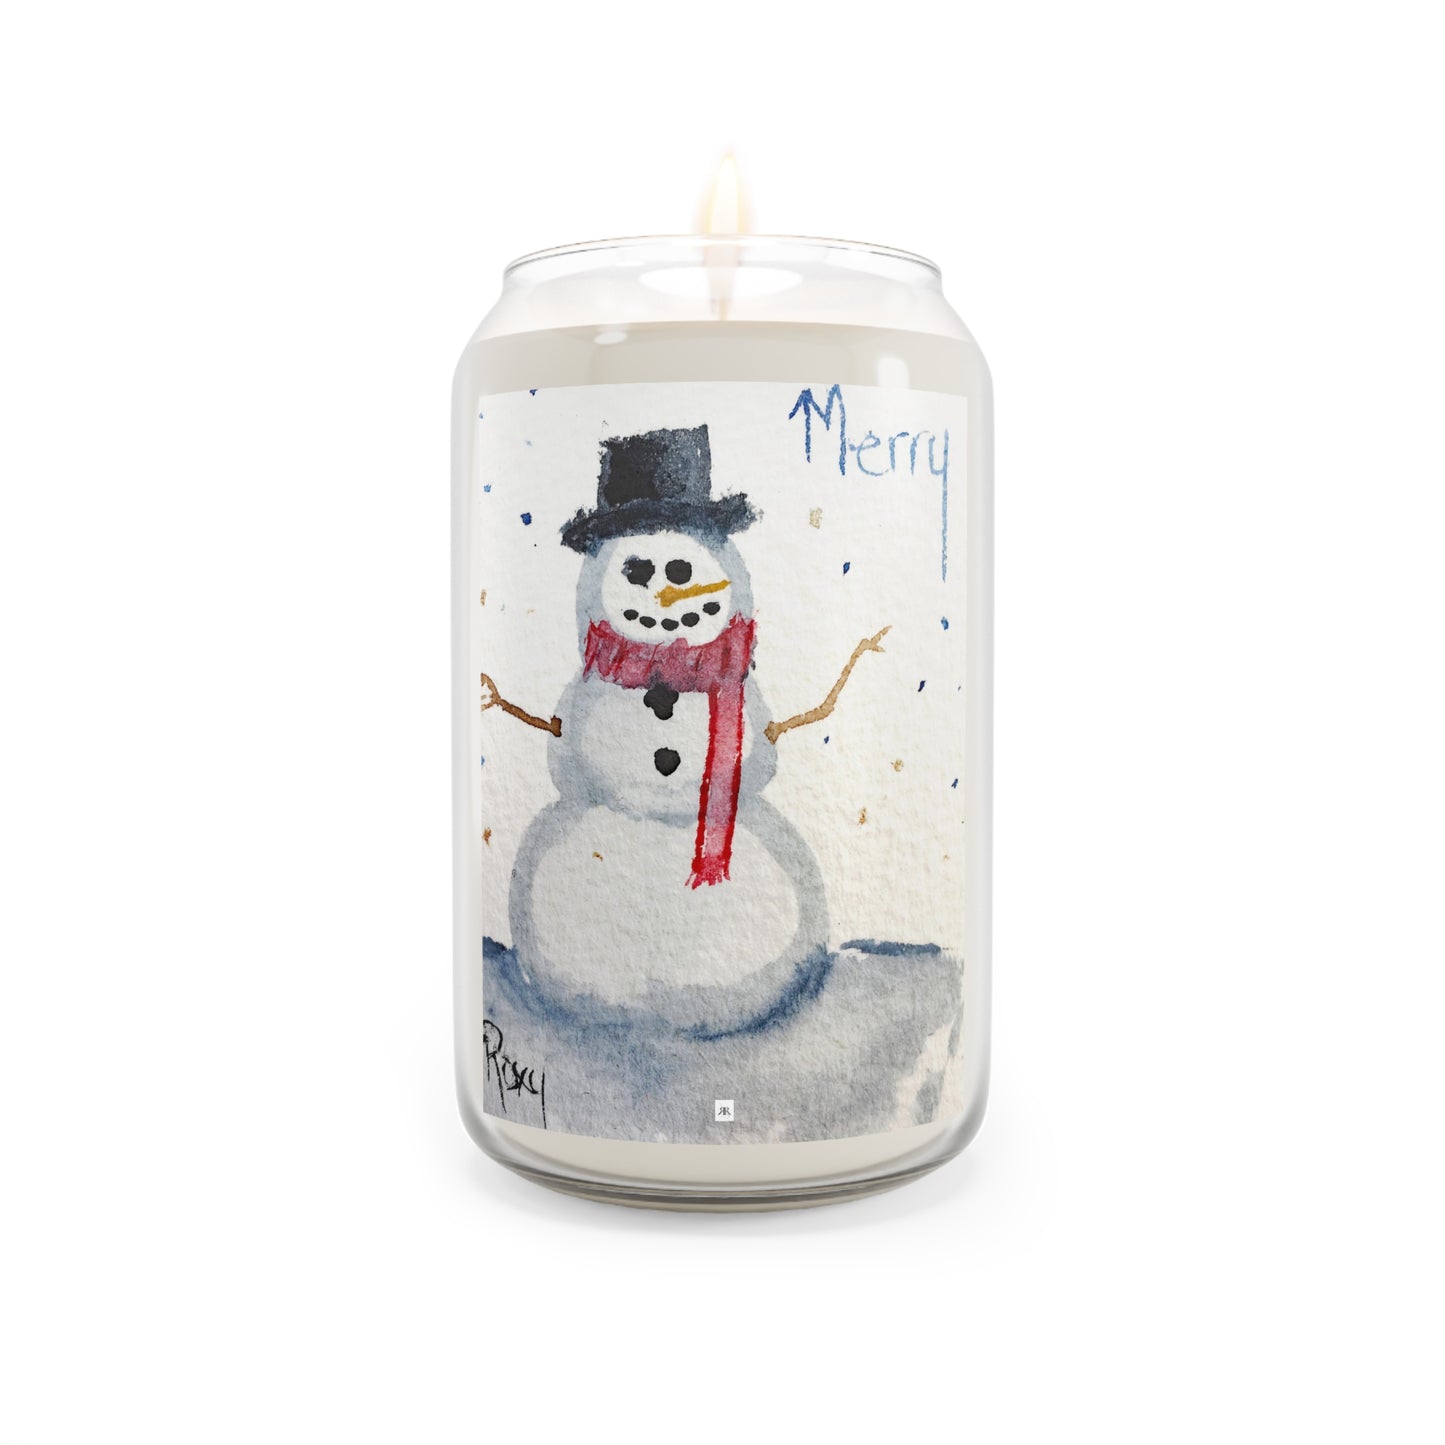 Merry Snowman Christmas Candle Scented Candle, 13.75oz